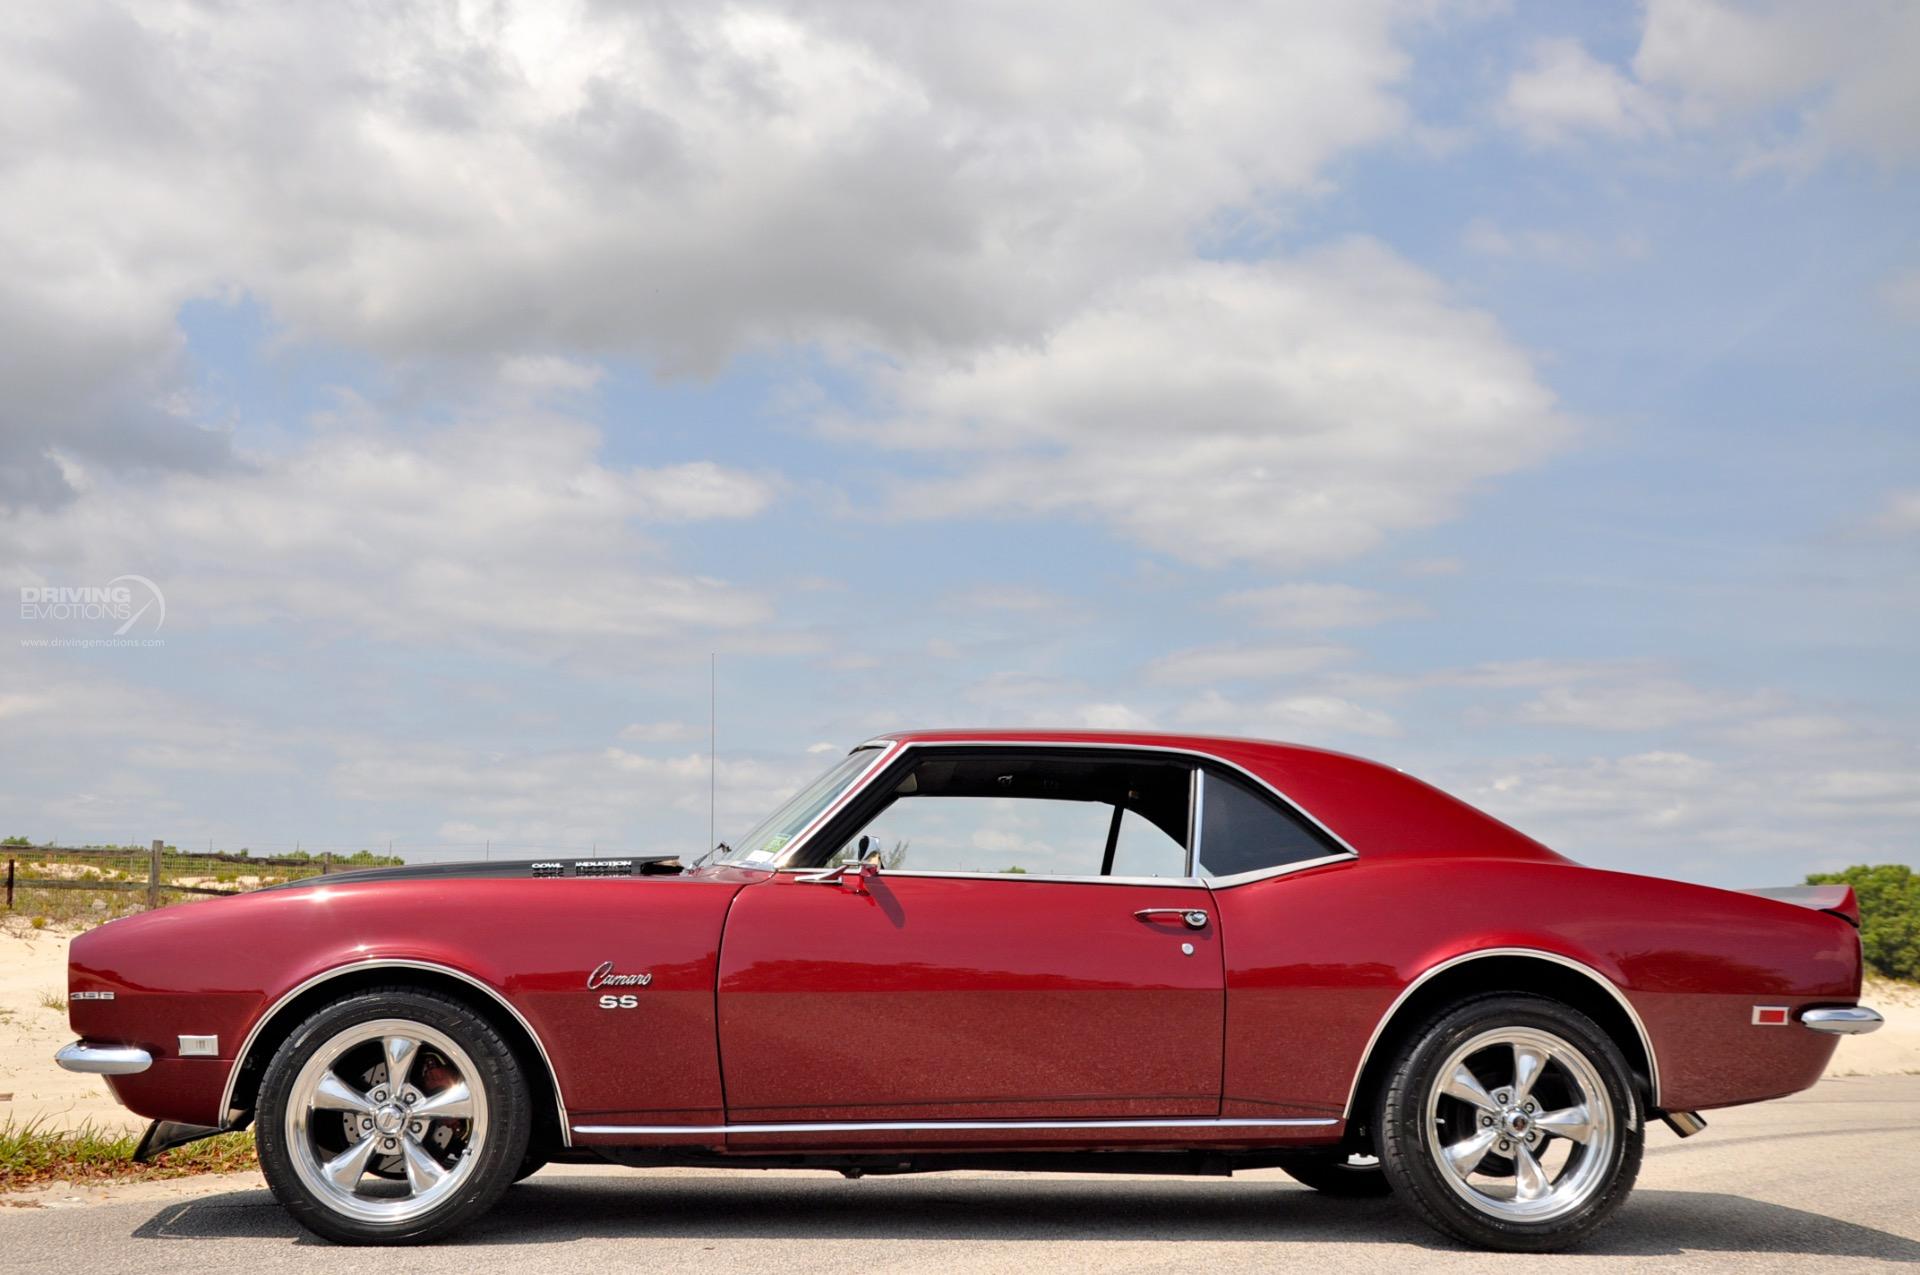 Manbeck says '68 Camaro SS is 'home to stay' - The Carroll County